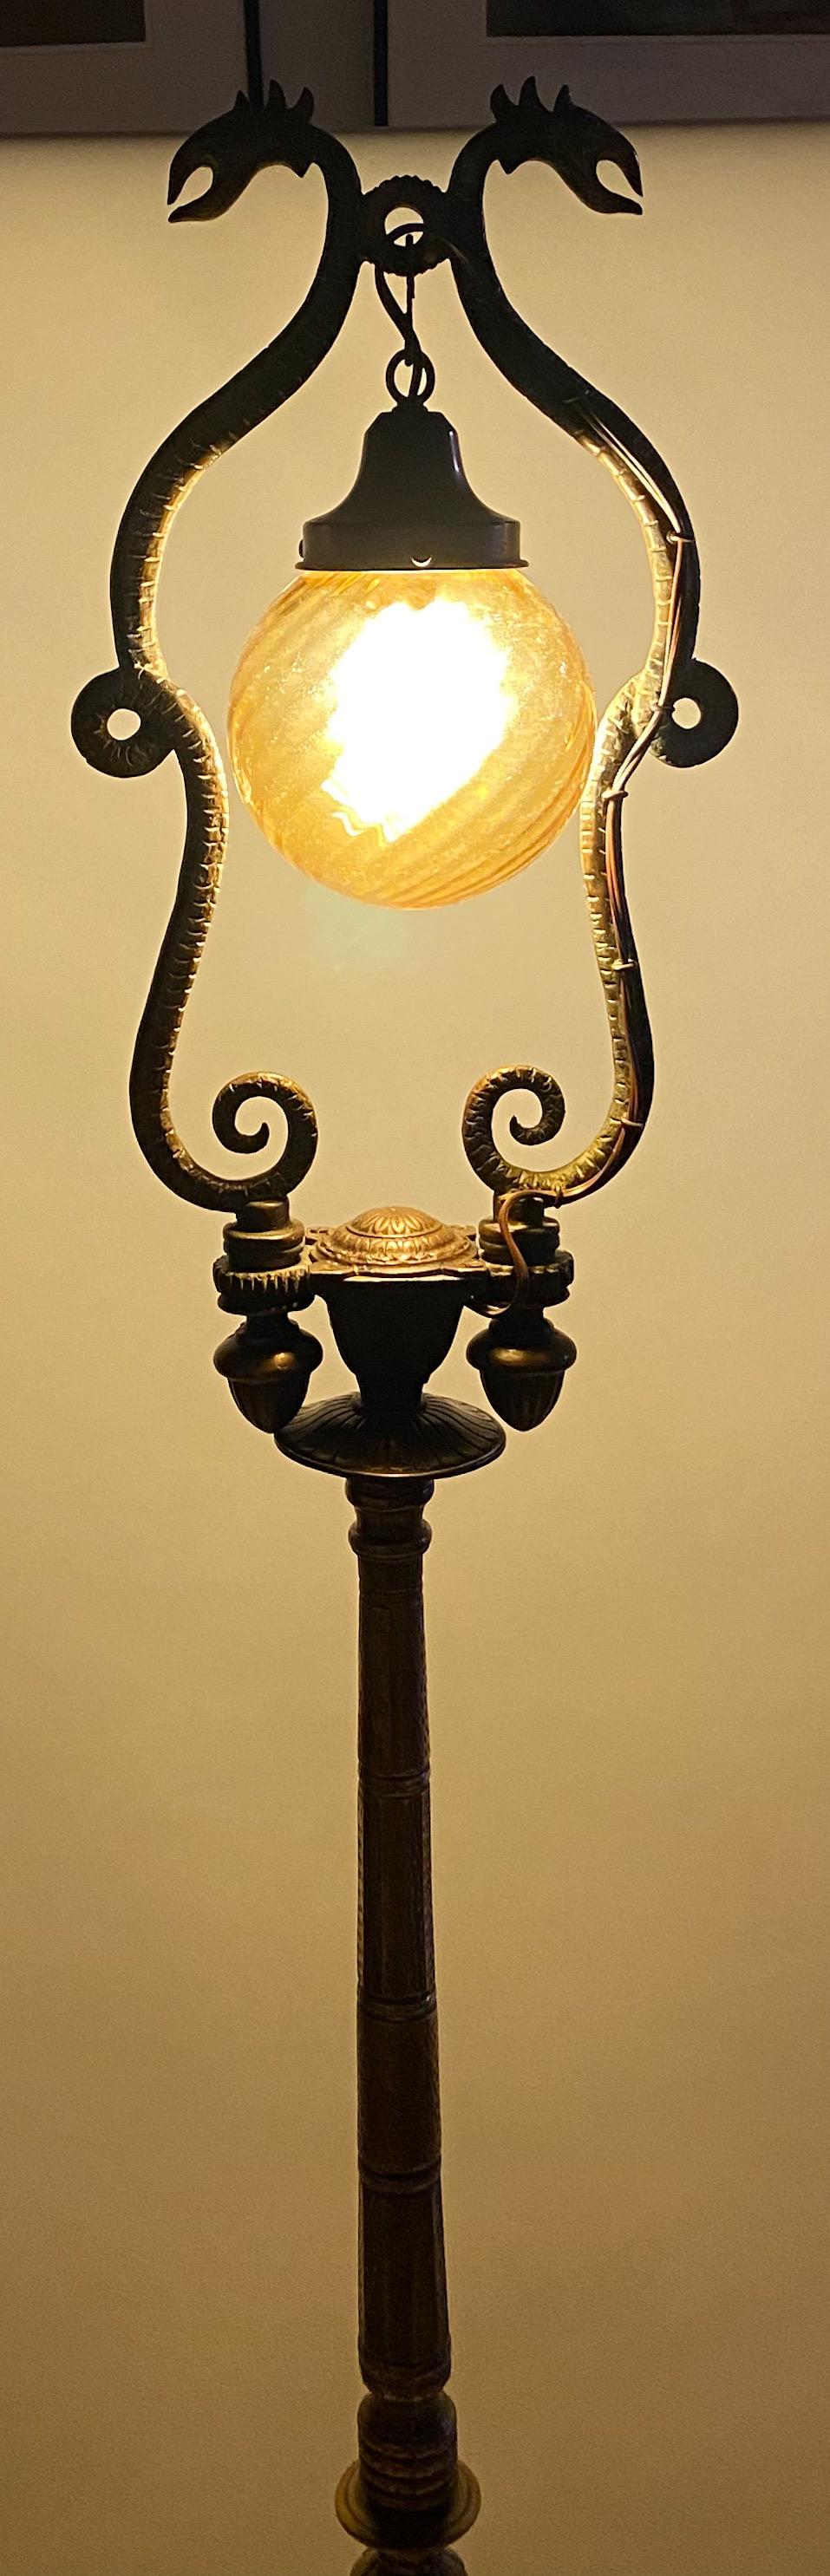 19th Century French Rococo Revival Style Bronze Patinated Dragons Floor Lamp For Sale 10